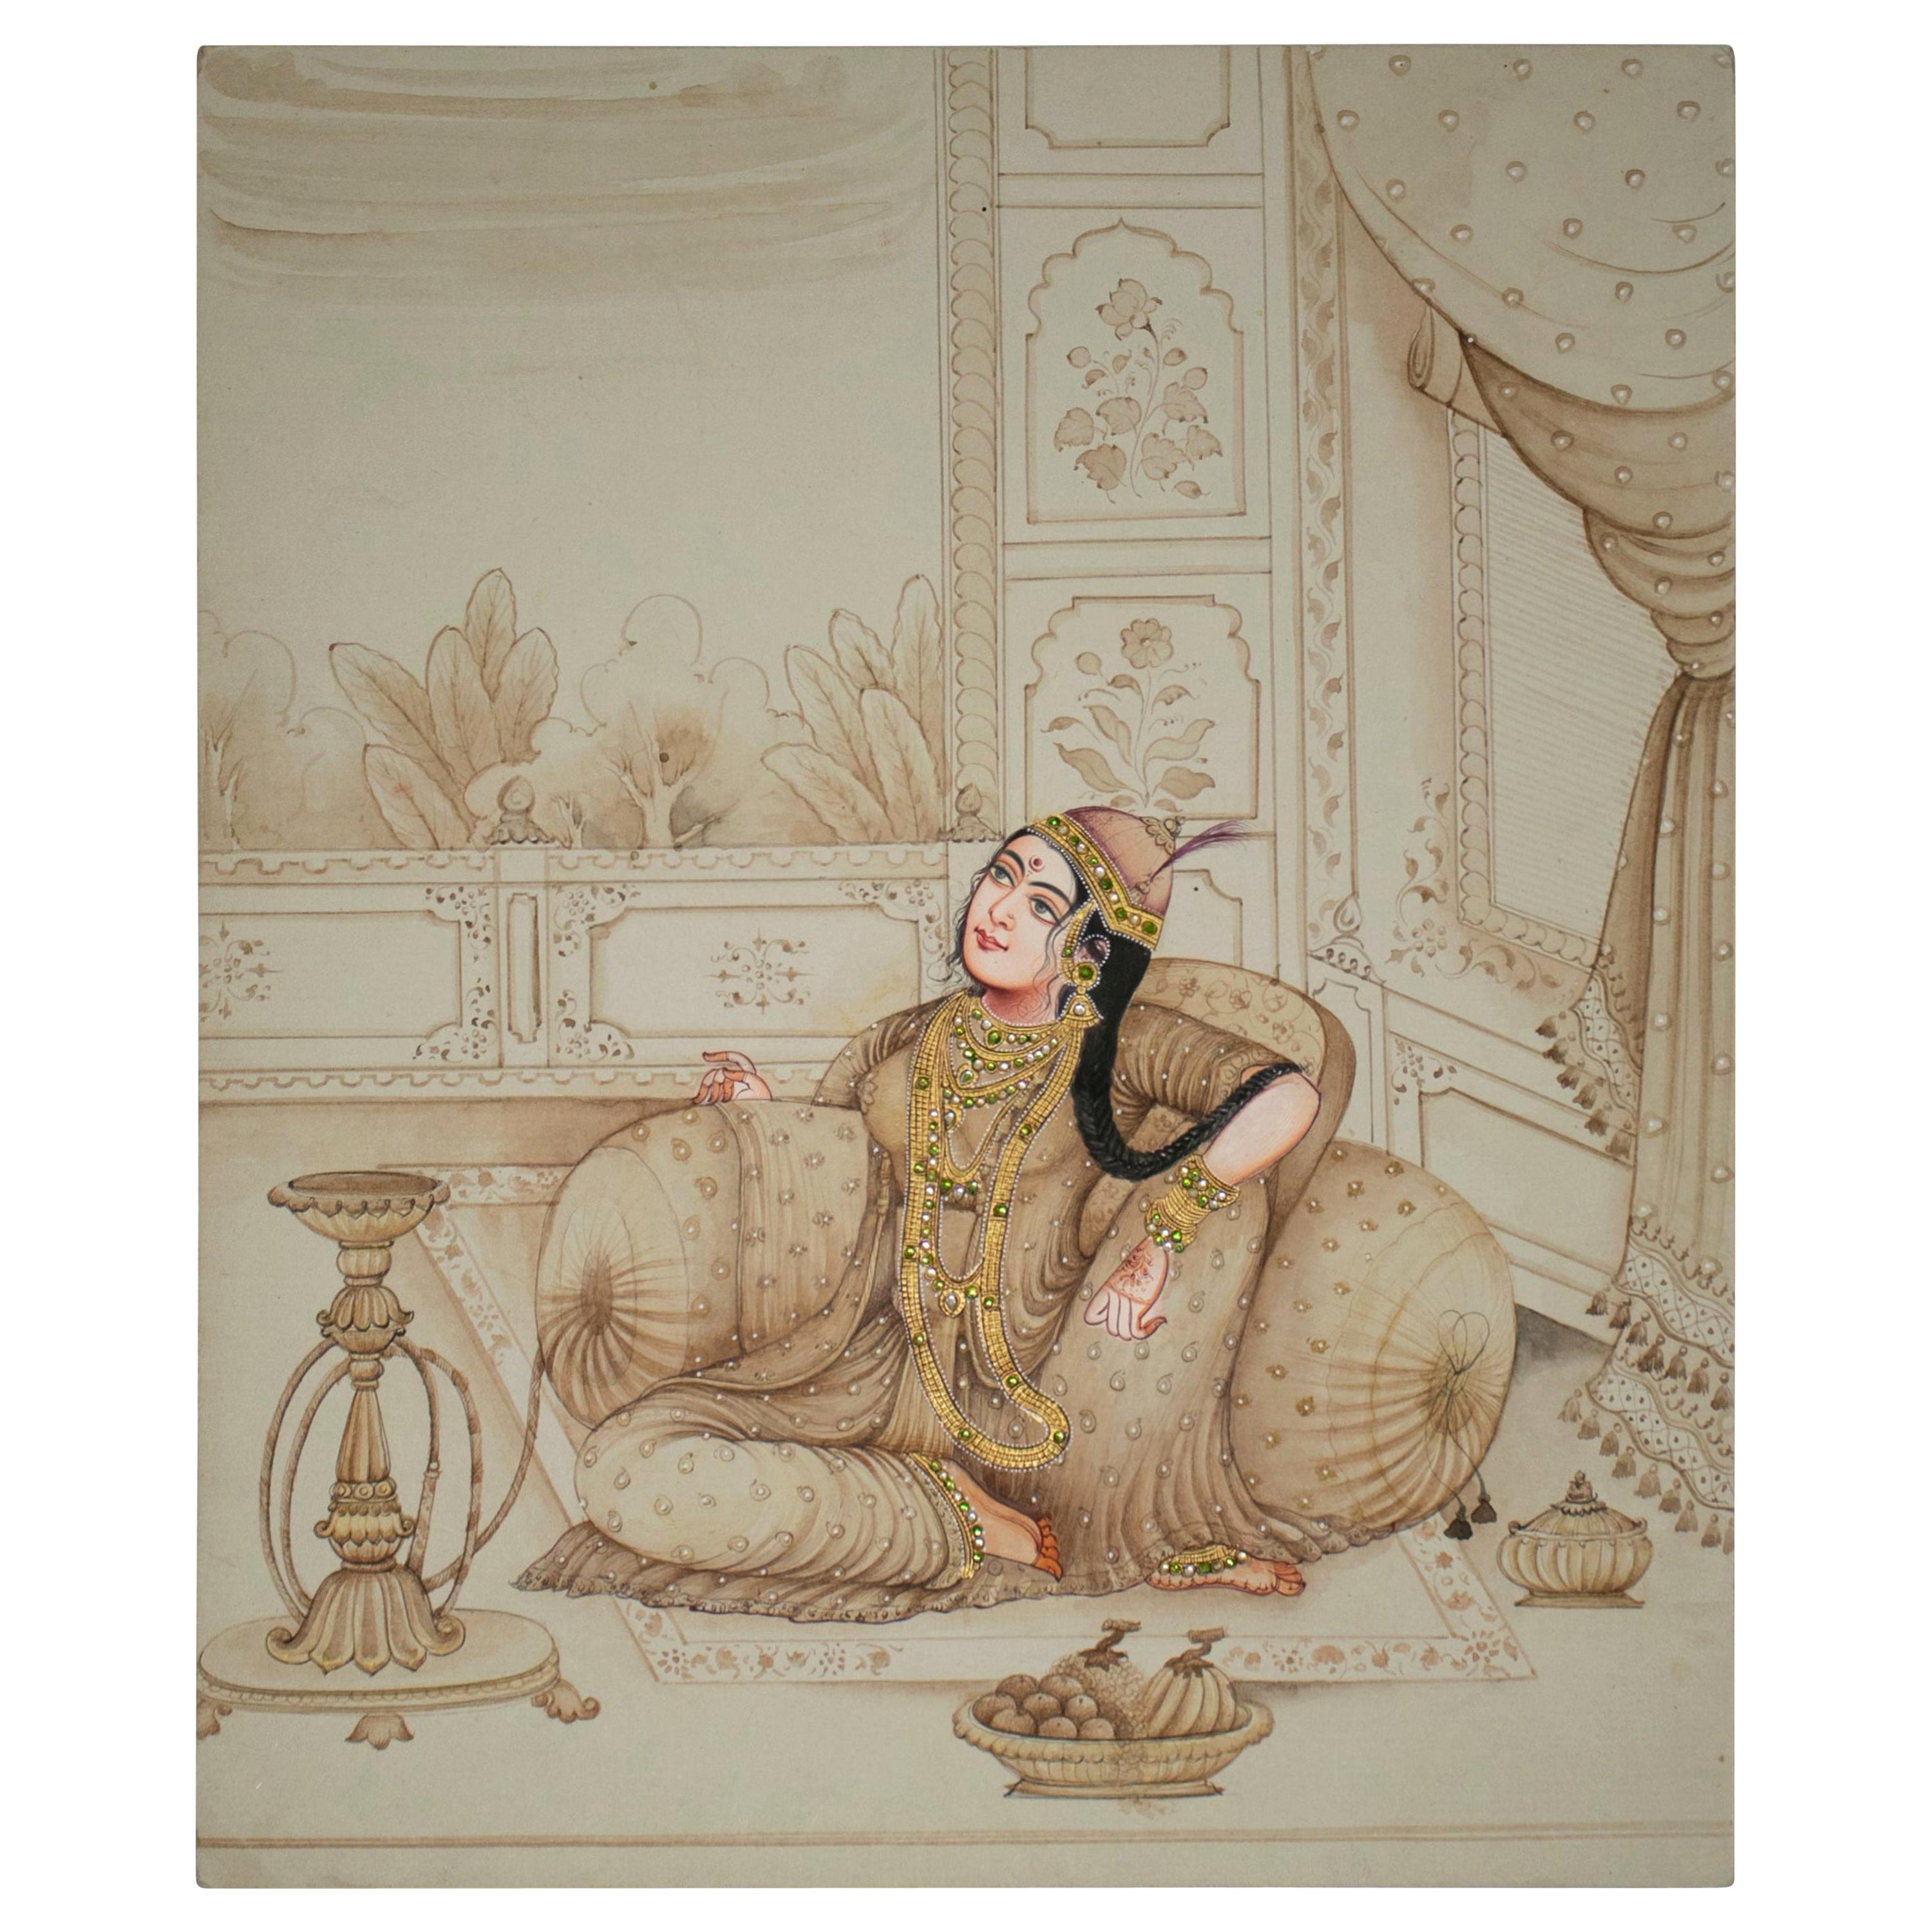 1970s Indian Paper Drawing of a Woman Sitting in a Palace Room